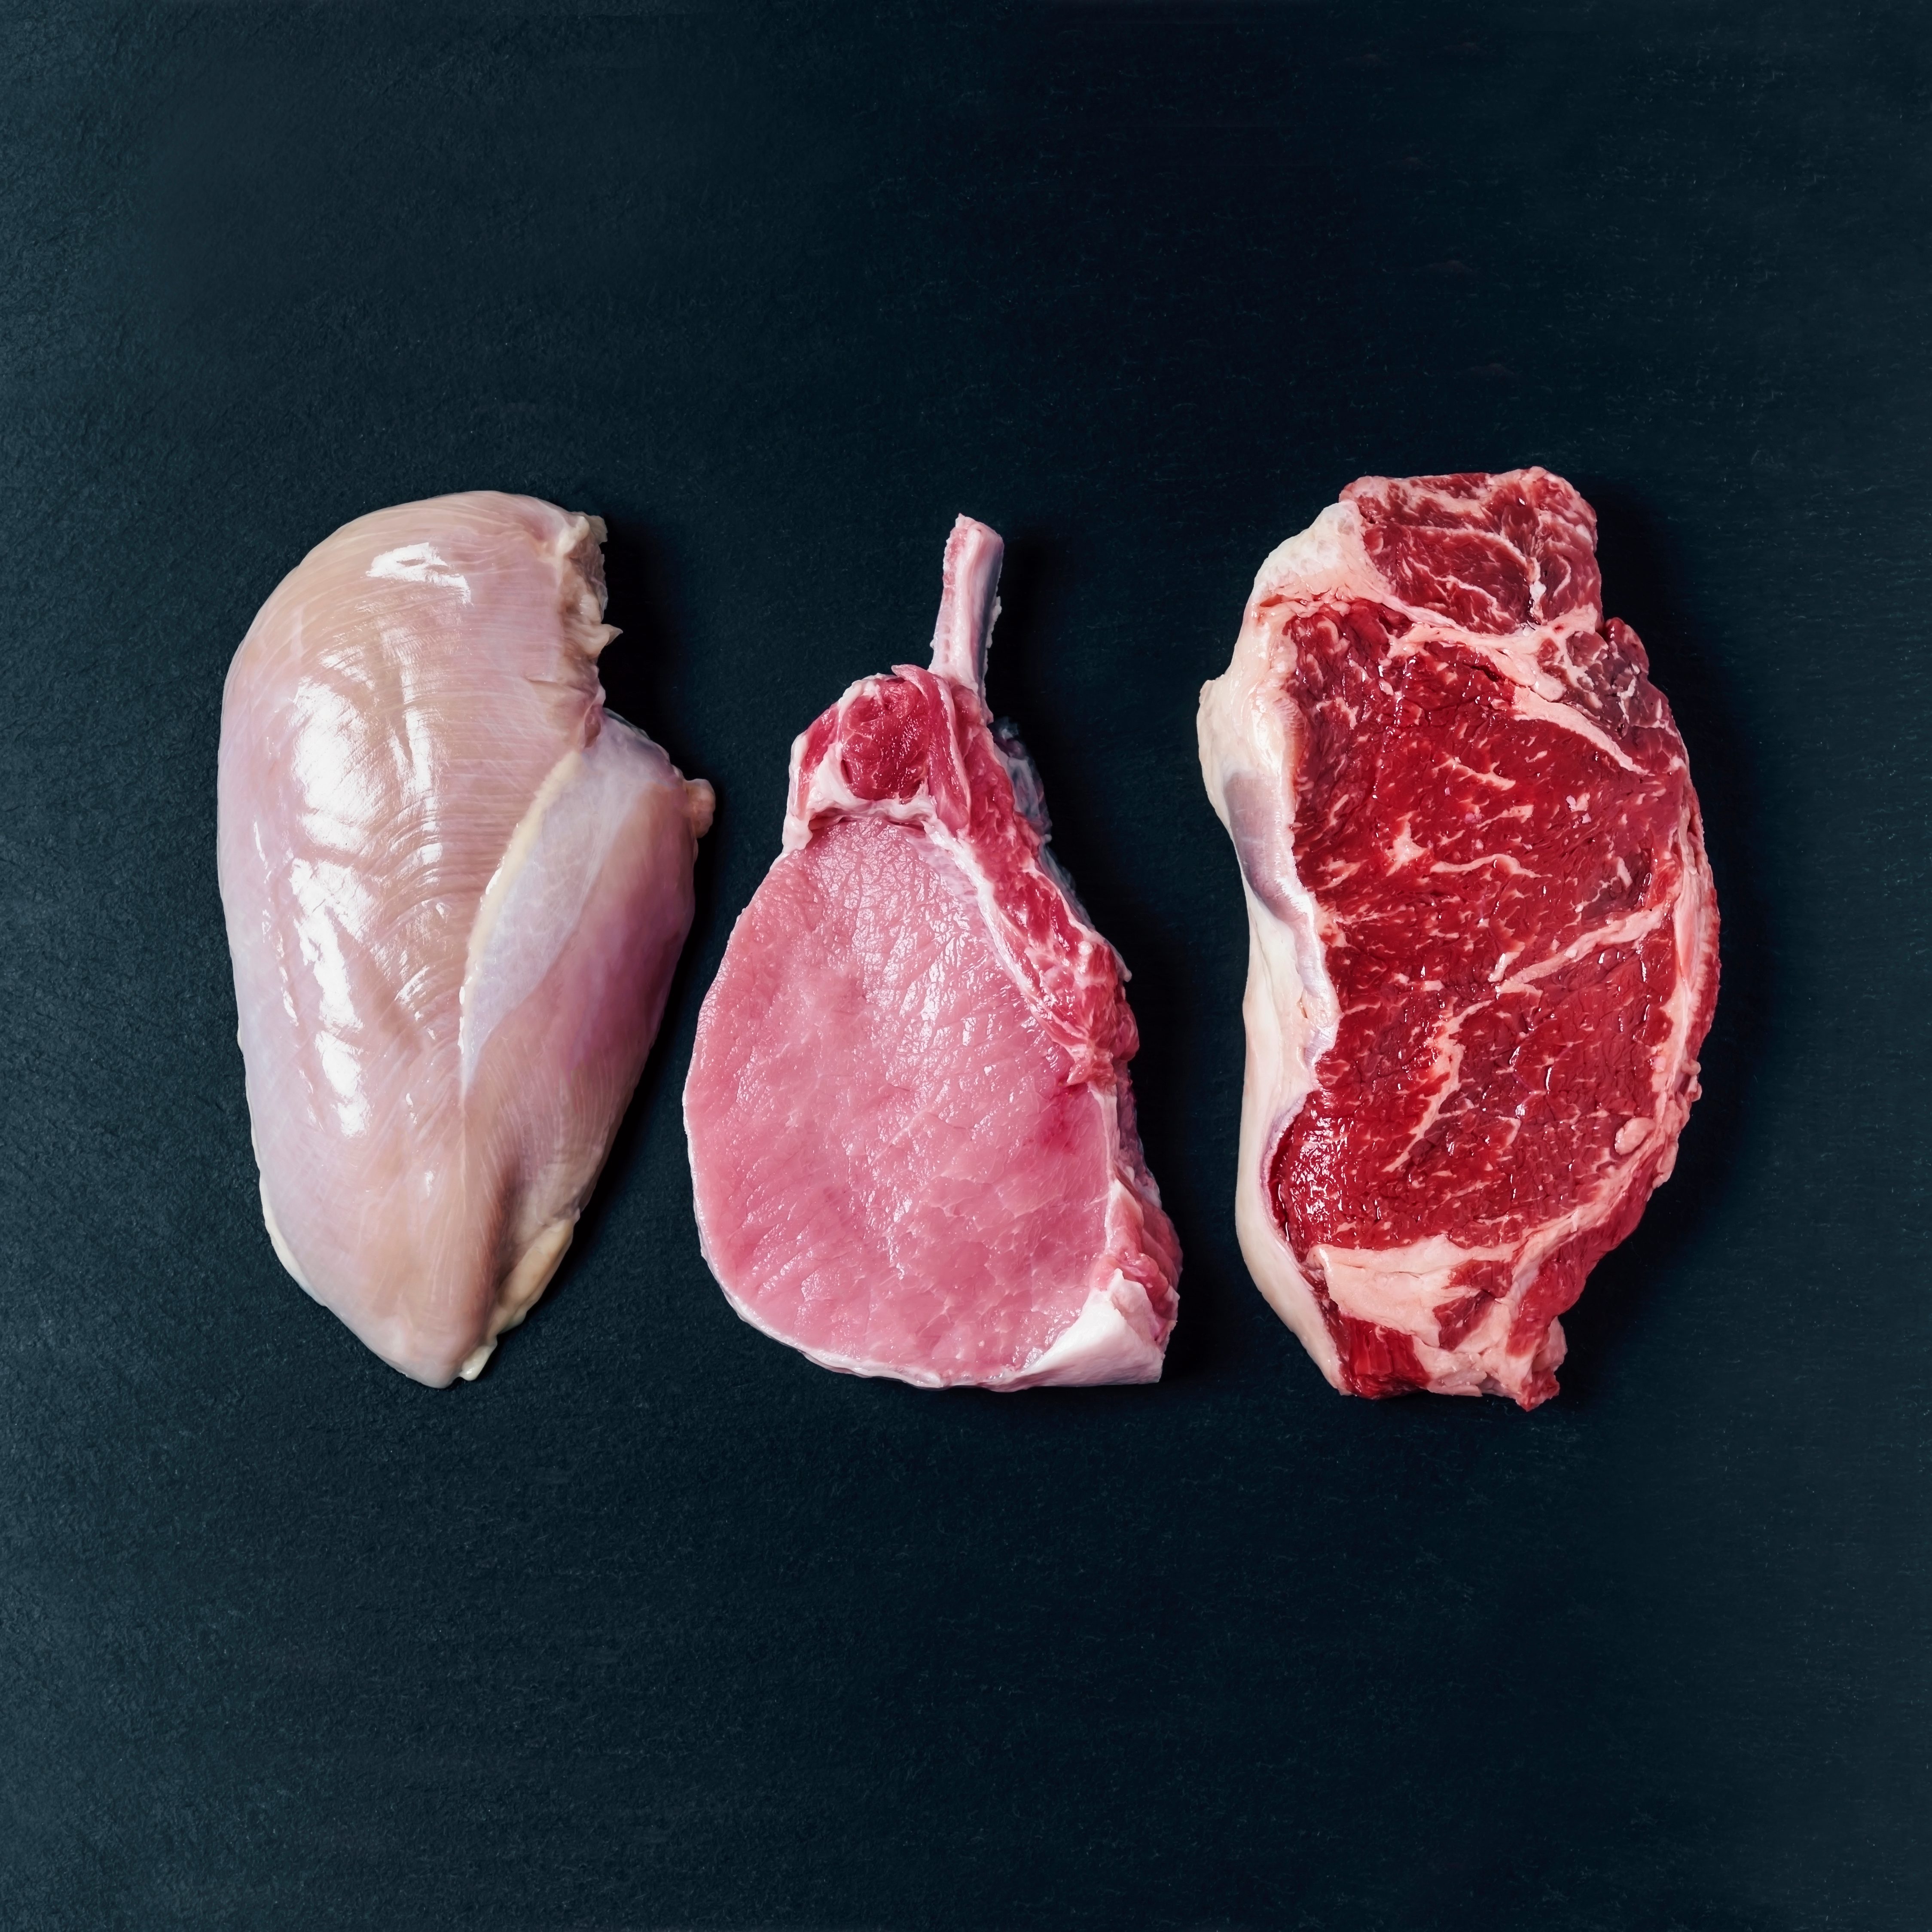 Meat Temperature Guide: Beef, Steak, Pork, Chicken, and More